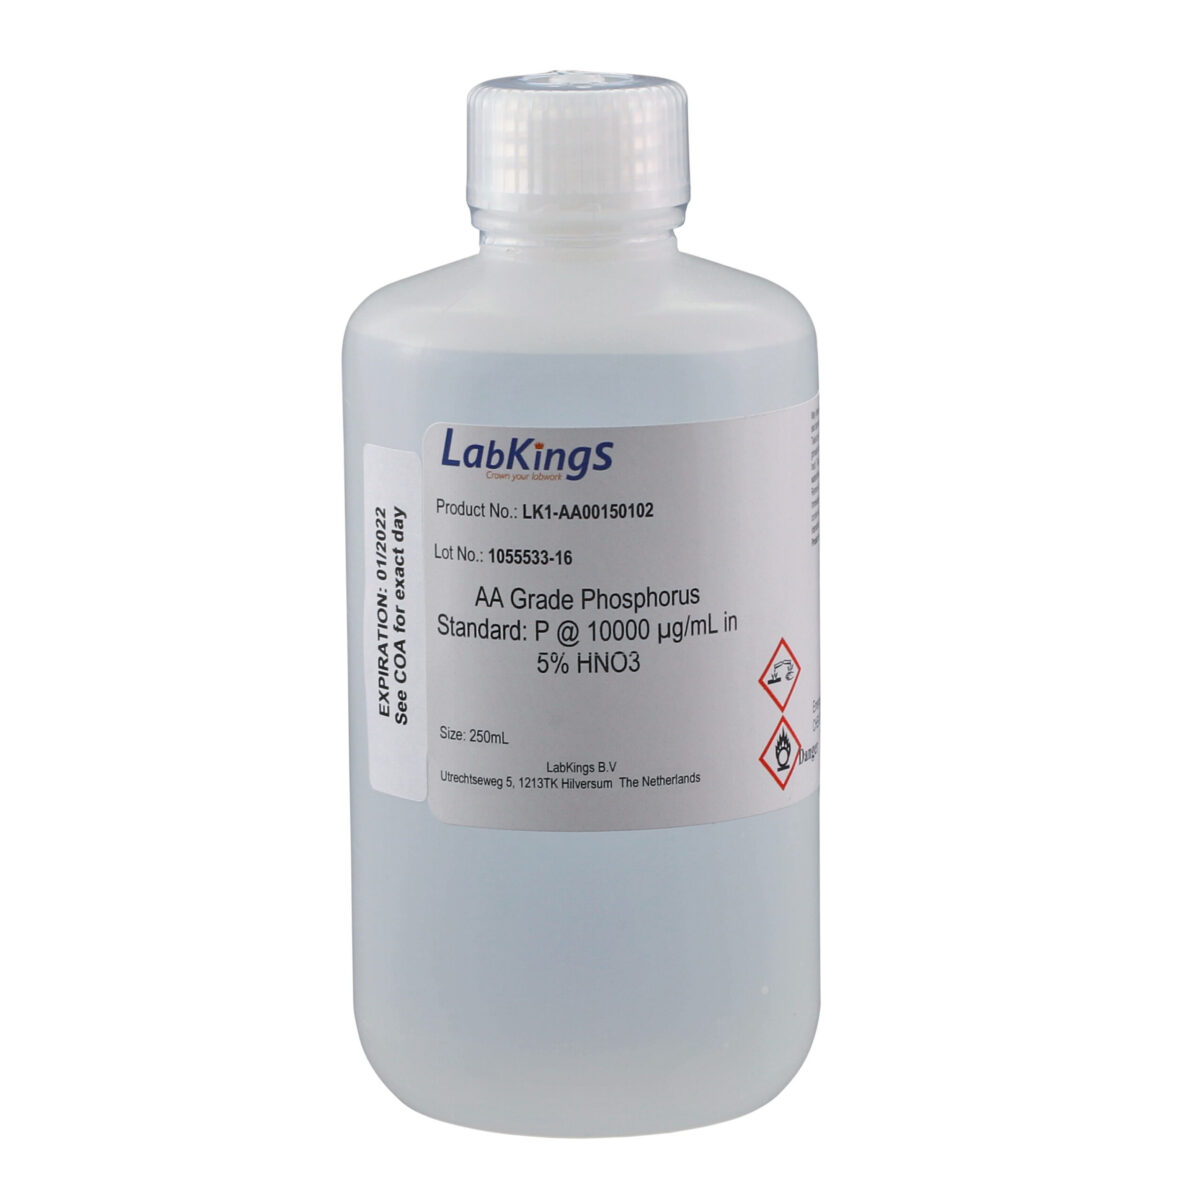 AA grade Phosphorus 10000 mg/L, diluted in HNO3, 100mL